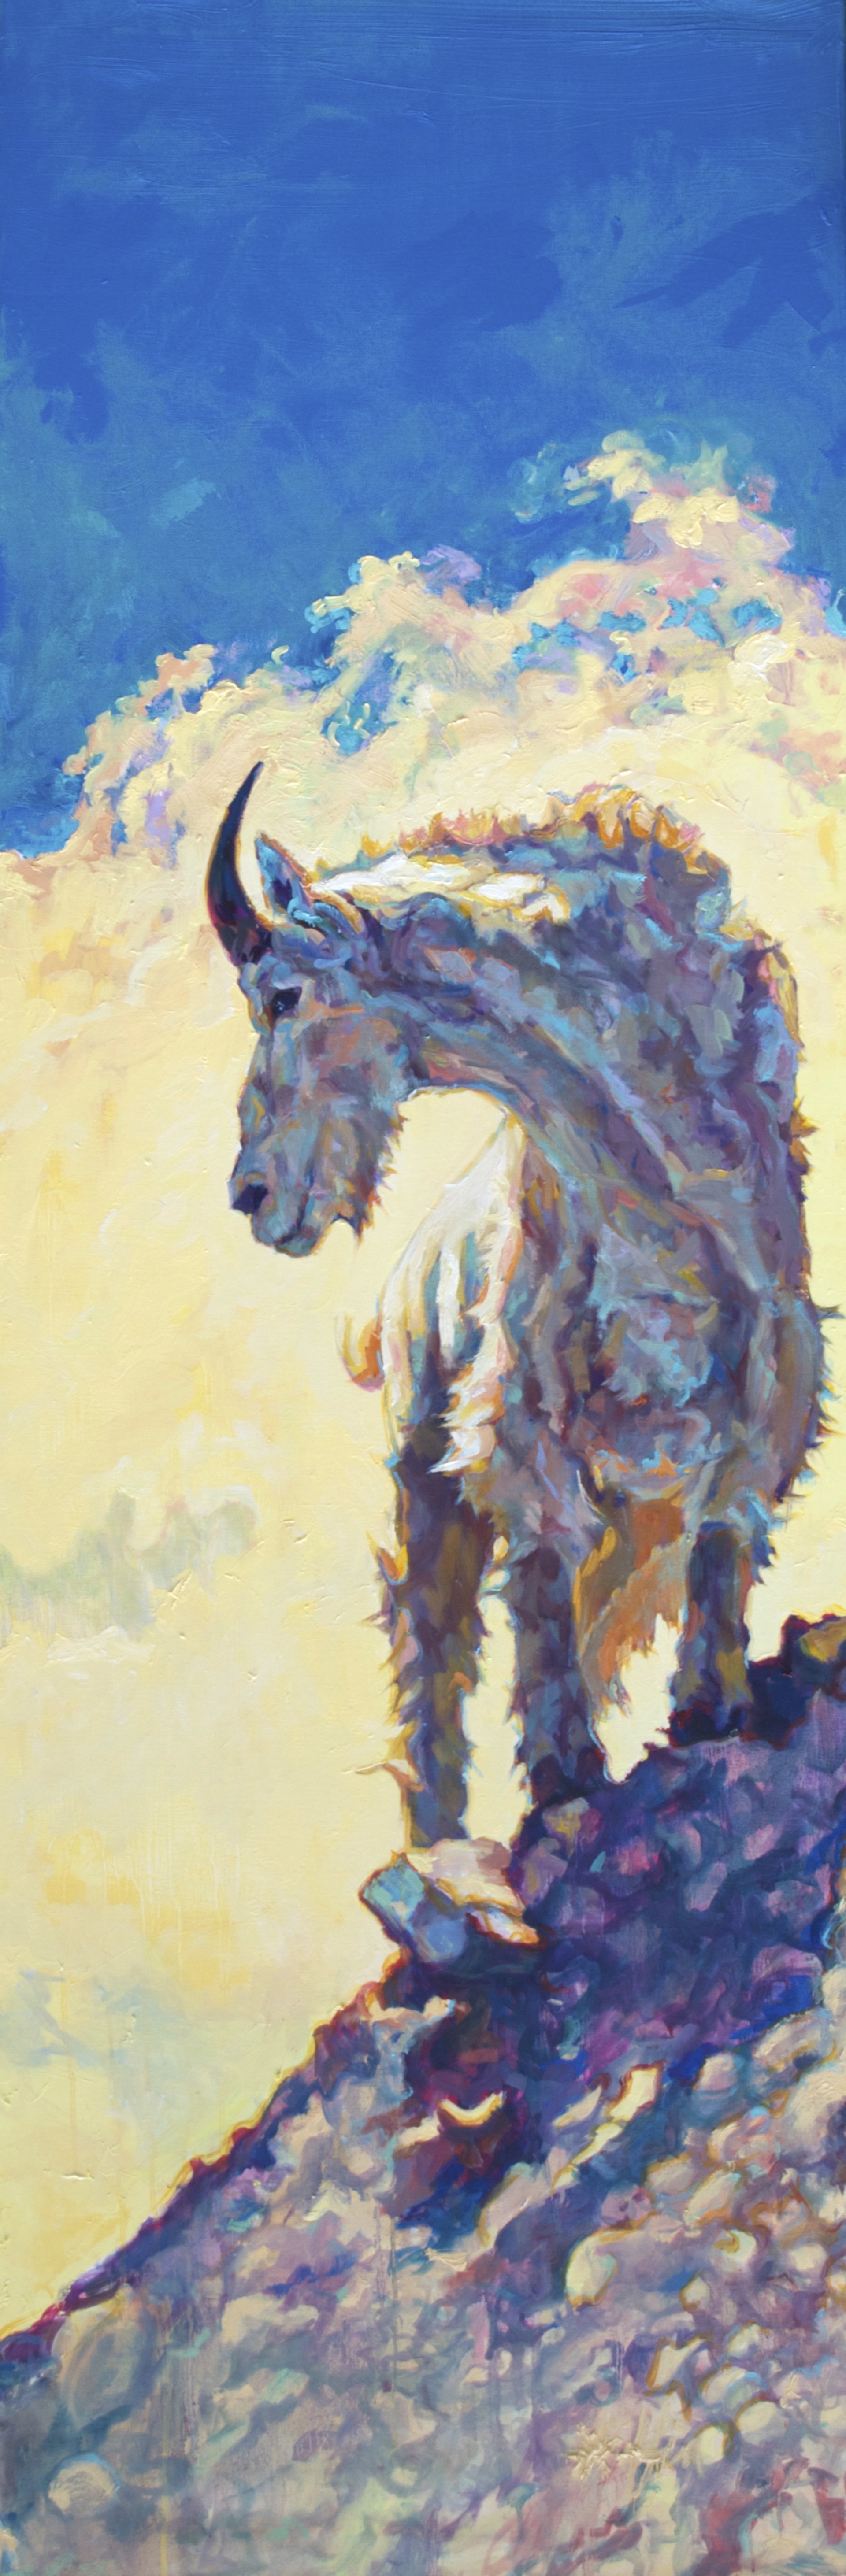 Sunlit Mountain Goat On Rocks By Patricia Griffin At Gallery Wild